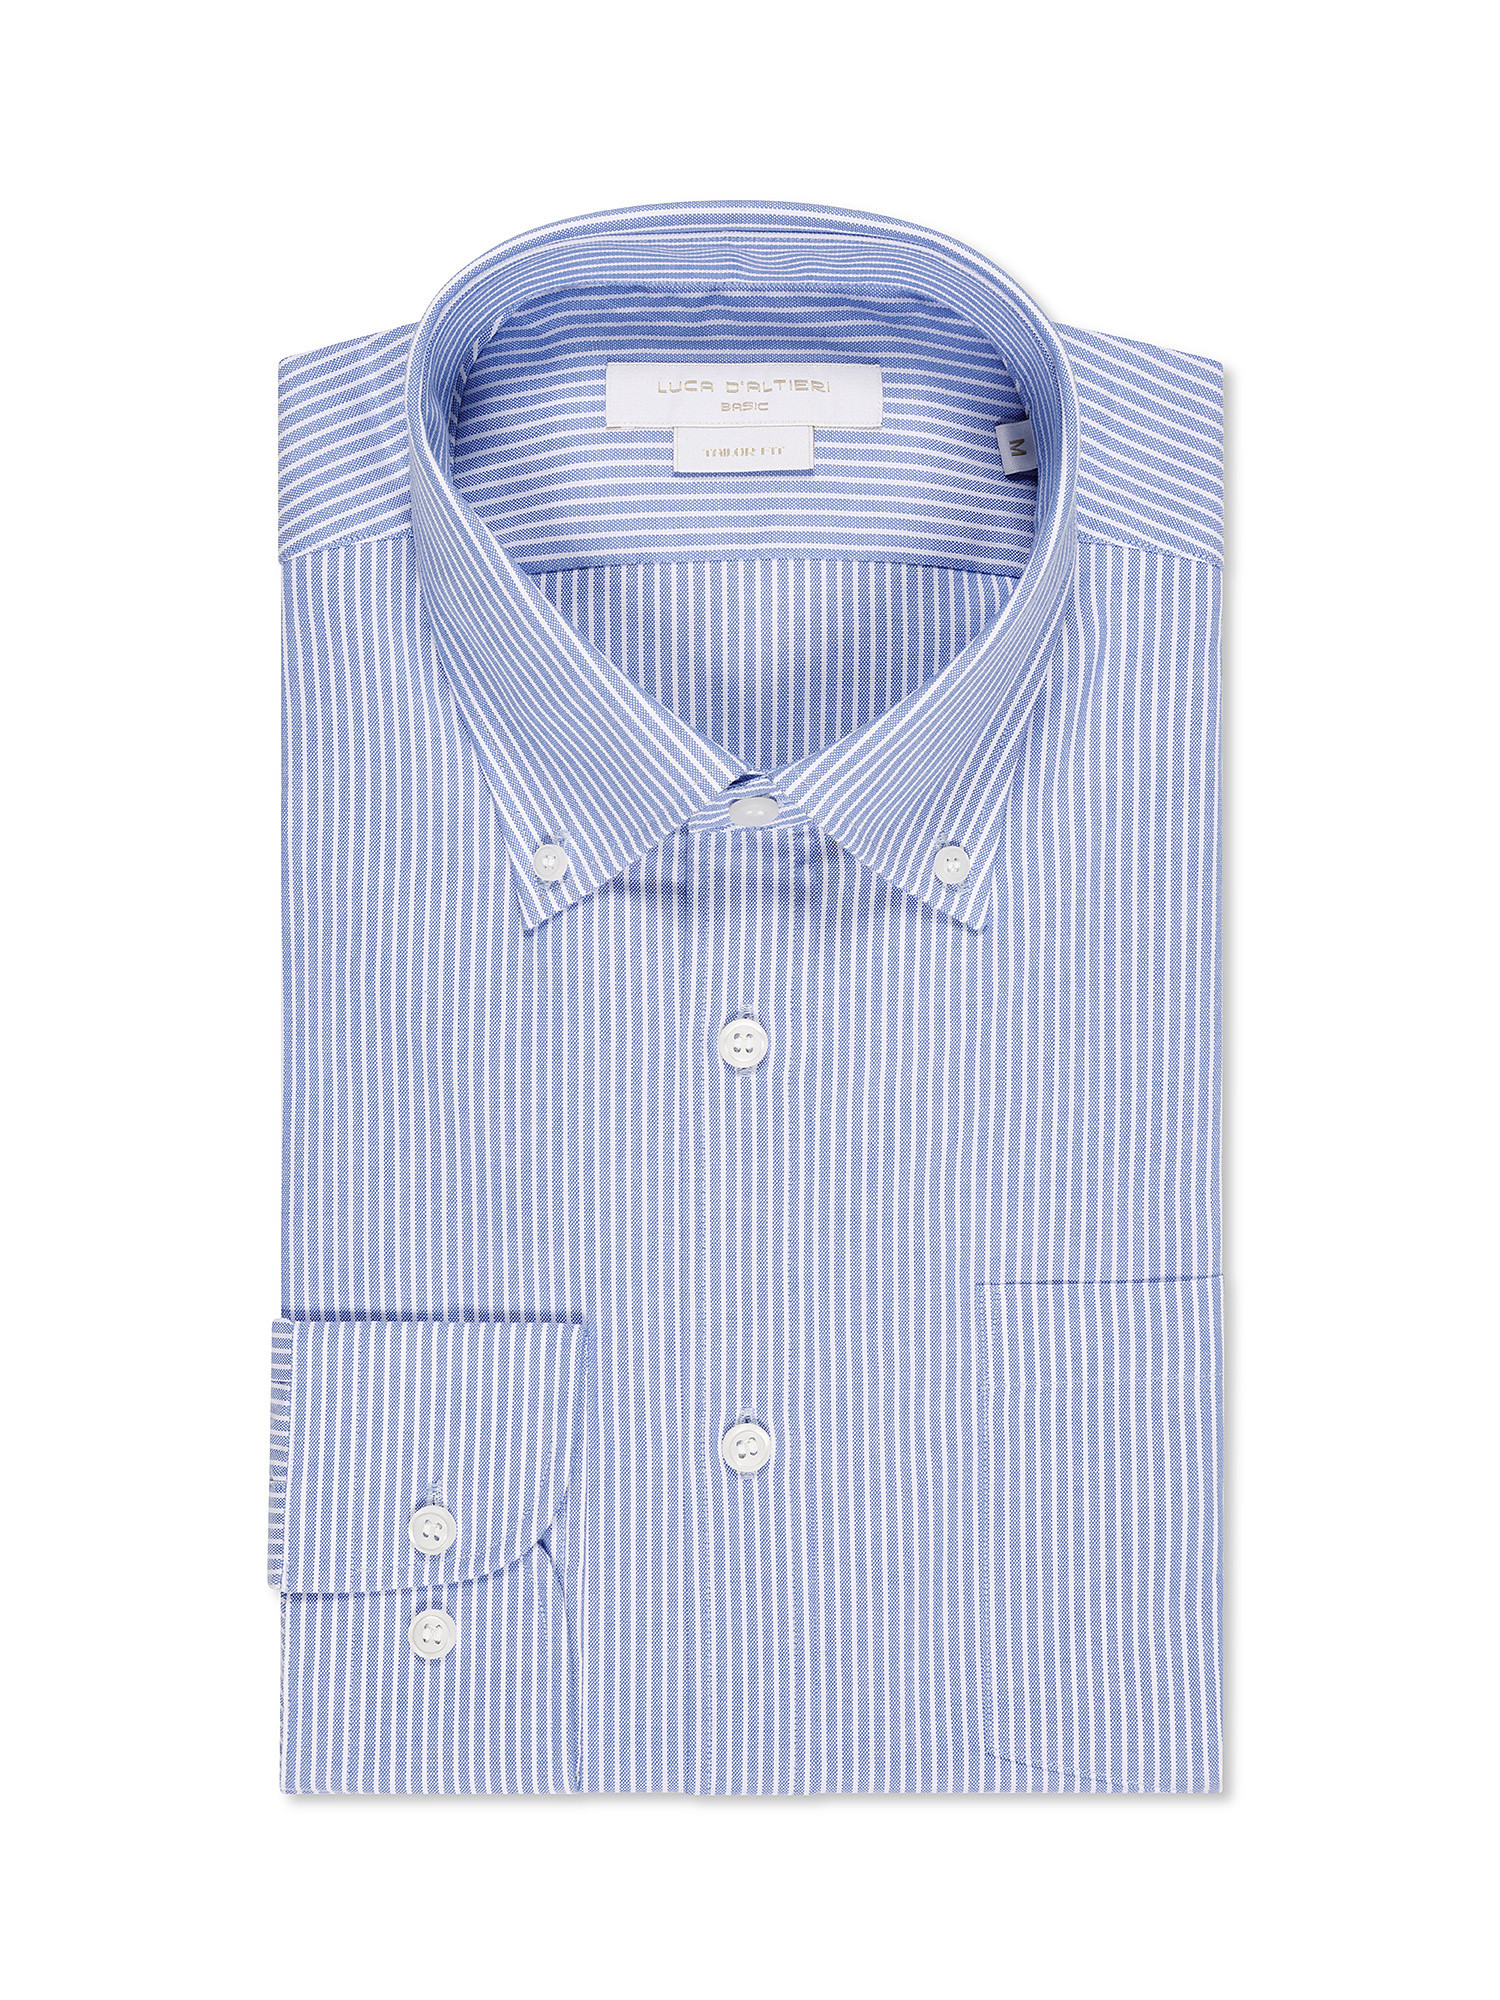 Basic tailor fit shirt in pure cotton, Light Blue, large image number 0